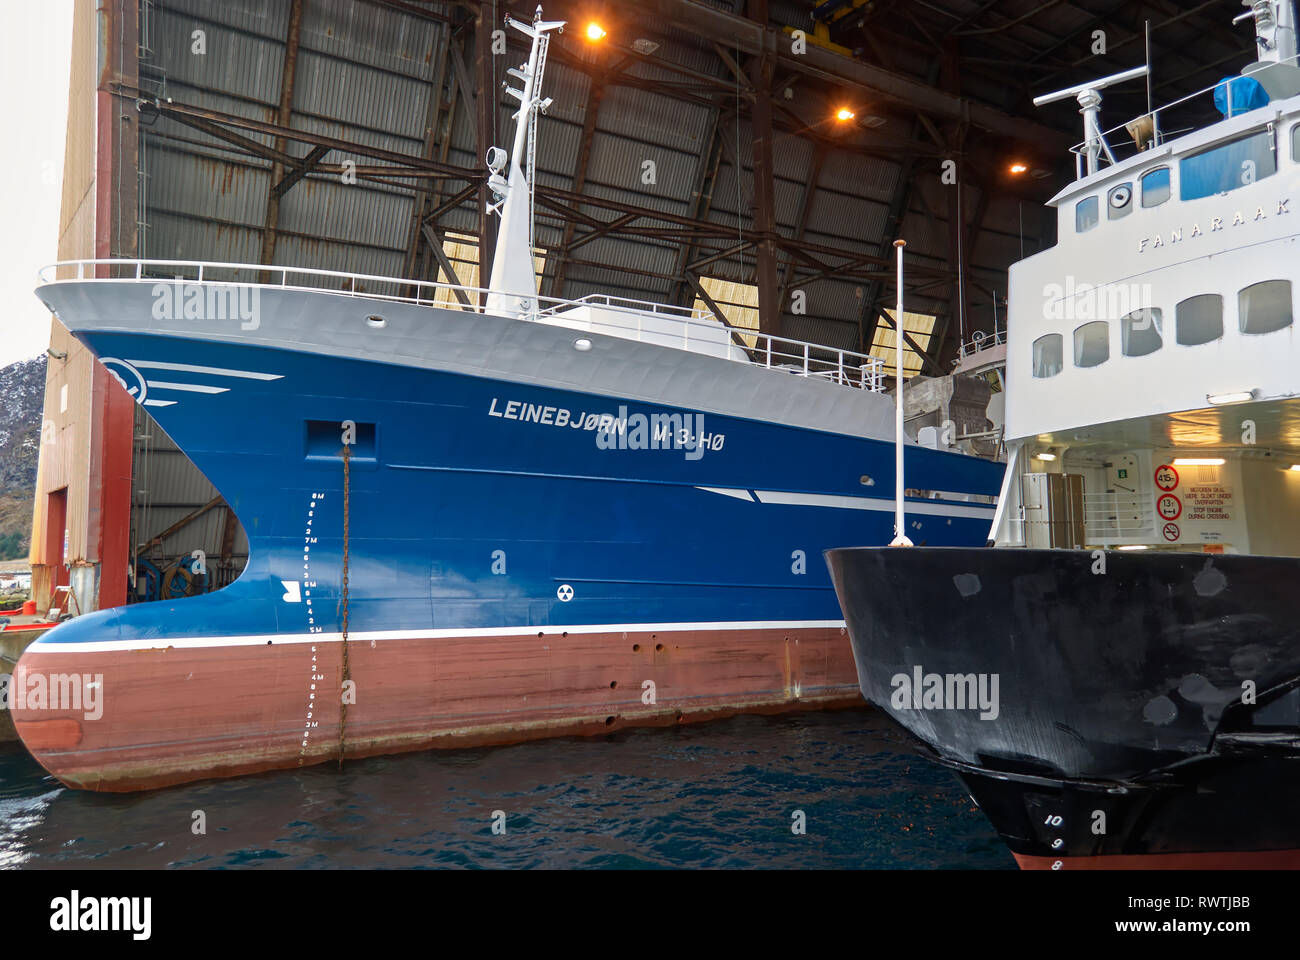 A Trawler and an Inter Island Car Ferry under the covered work area of the Batbygg Shipyard in Maloy, Norway having work done to them. Stock Photo